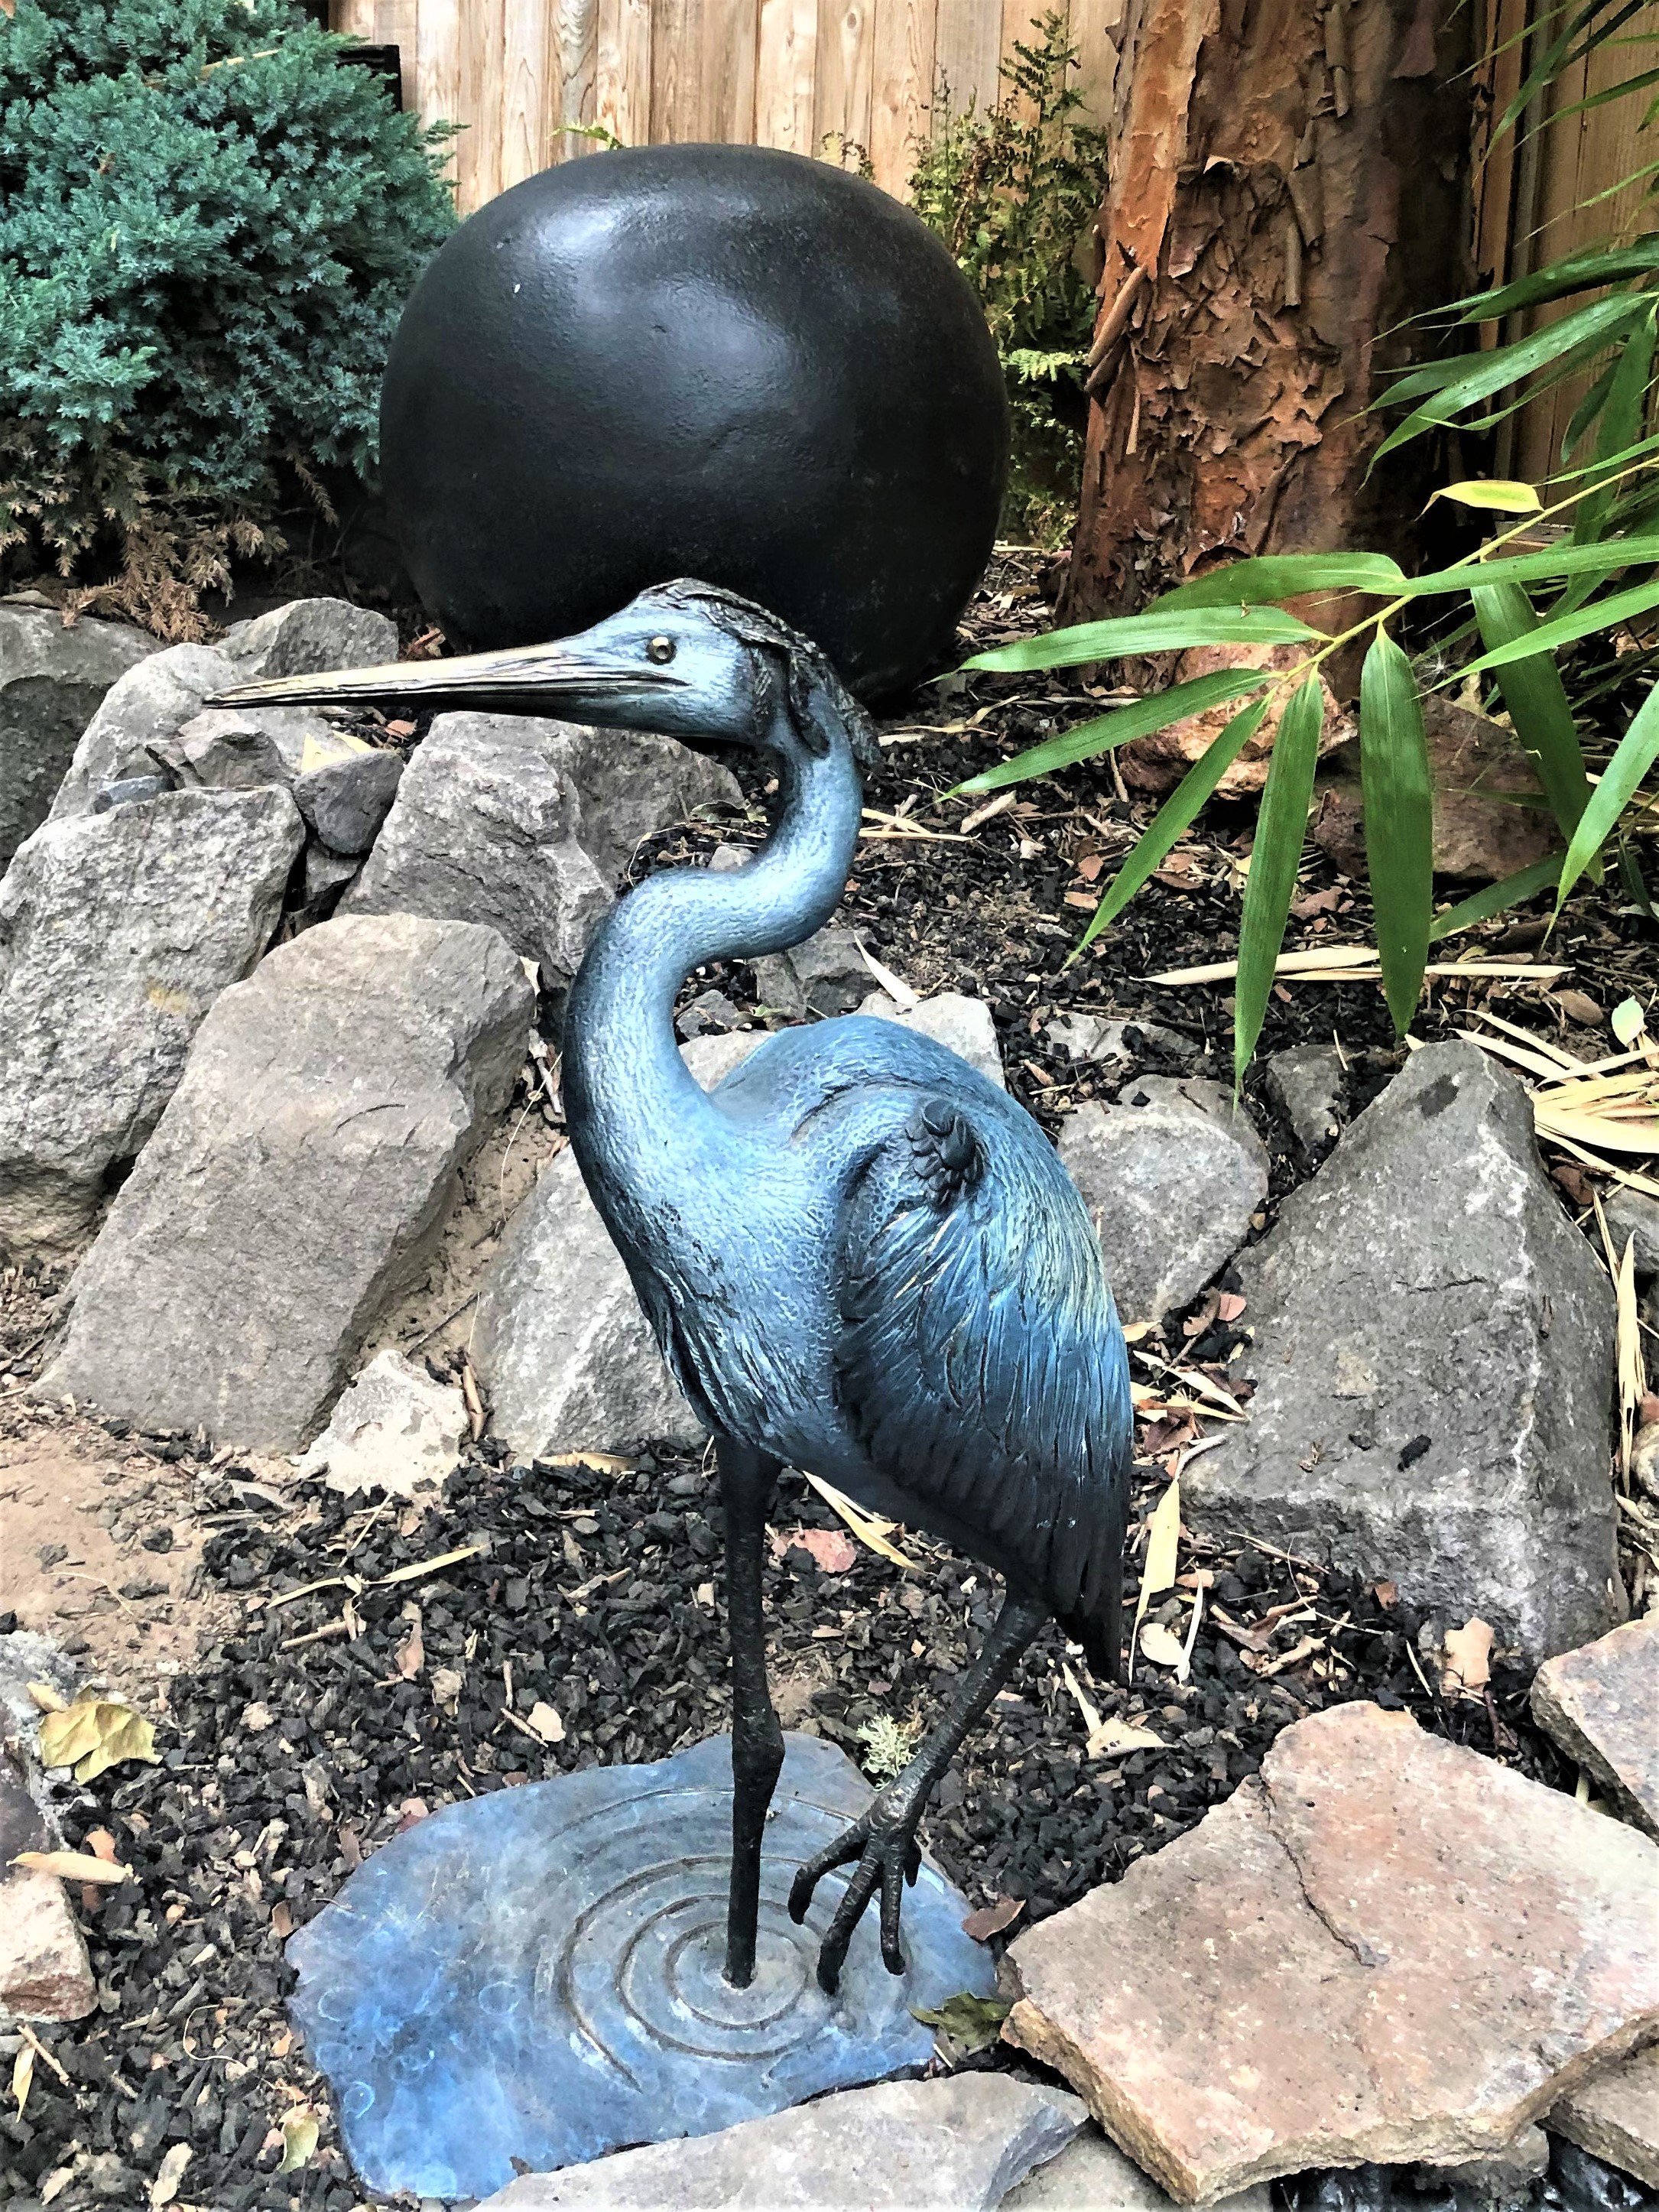 Joe Jumalon: 'Serentiy Blue Heron', 2019 Bronze Sculpture, Birds. The Serenity Blue Heron is a limited edition of exquisite wildlife art.  Blue herons are waders, typically living along coastlines, in marshes, or near the shores of ponds and streams.  Most often they stand perfectly still in the water which creates a calm, even serene, scene.  These limited edition hand ...